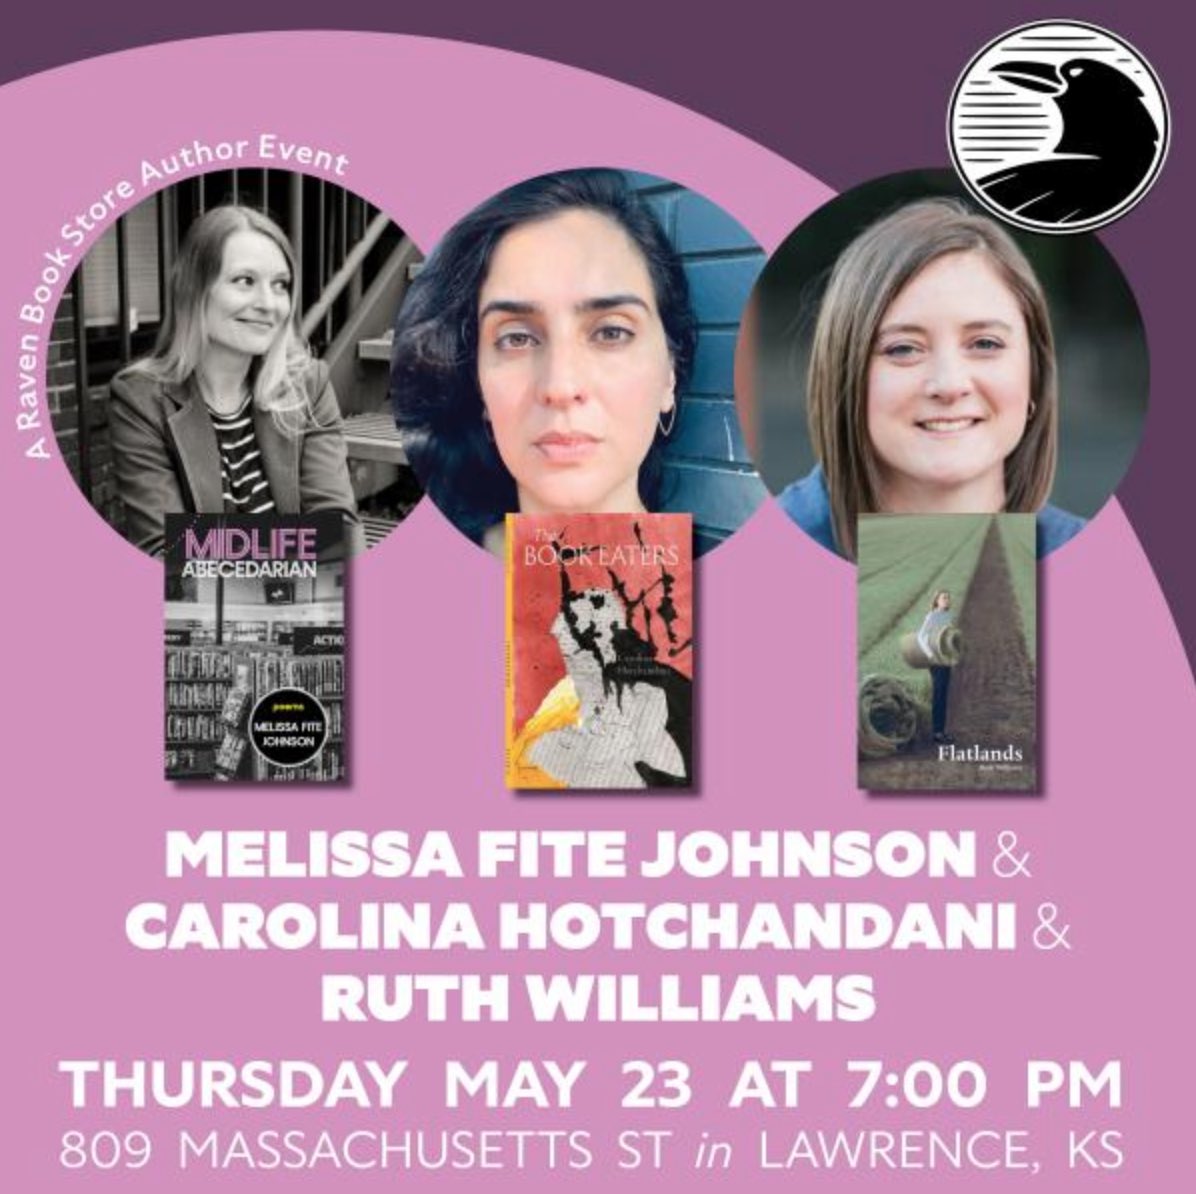 Carolina Hotchandani will be reading with poets Melissa Fite Johnson and Ruth Williams at the Raven Book Store in Lawrence, Kansas on Thursday, May 23 at 7pm. 🐦‍⬛📚🐦‍⬛ @CHotchandani @MFiteJohnson @ravenbookstore